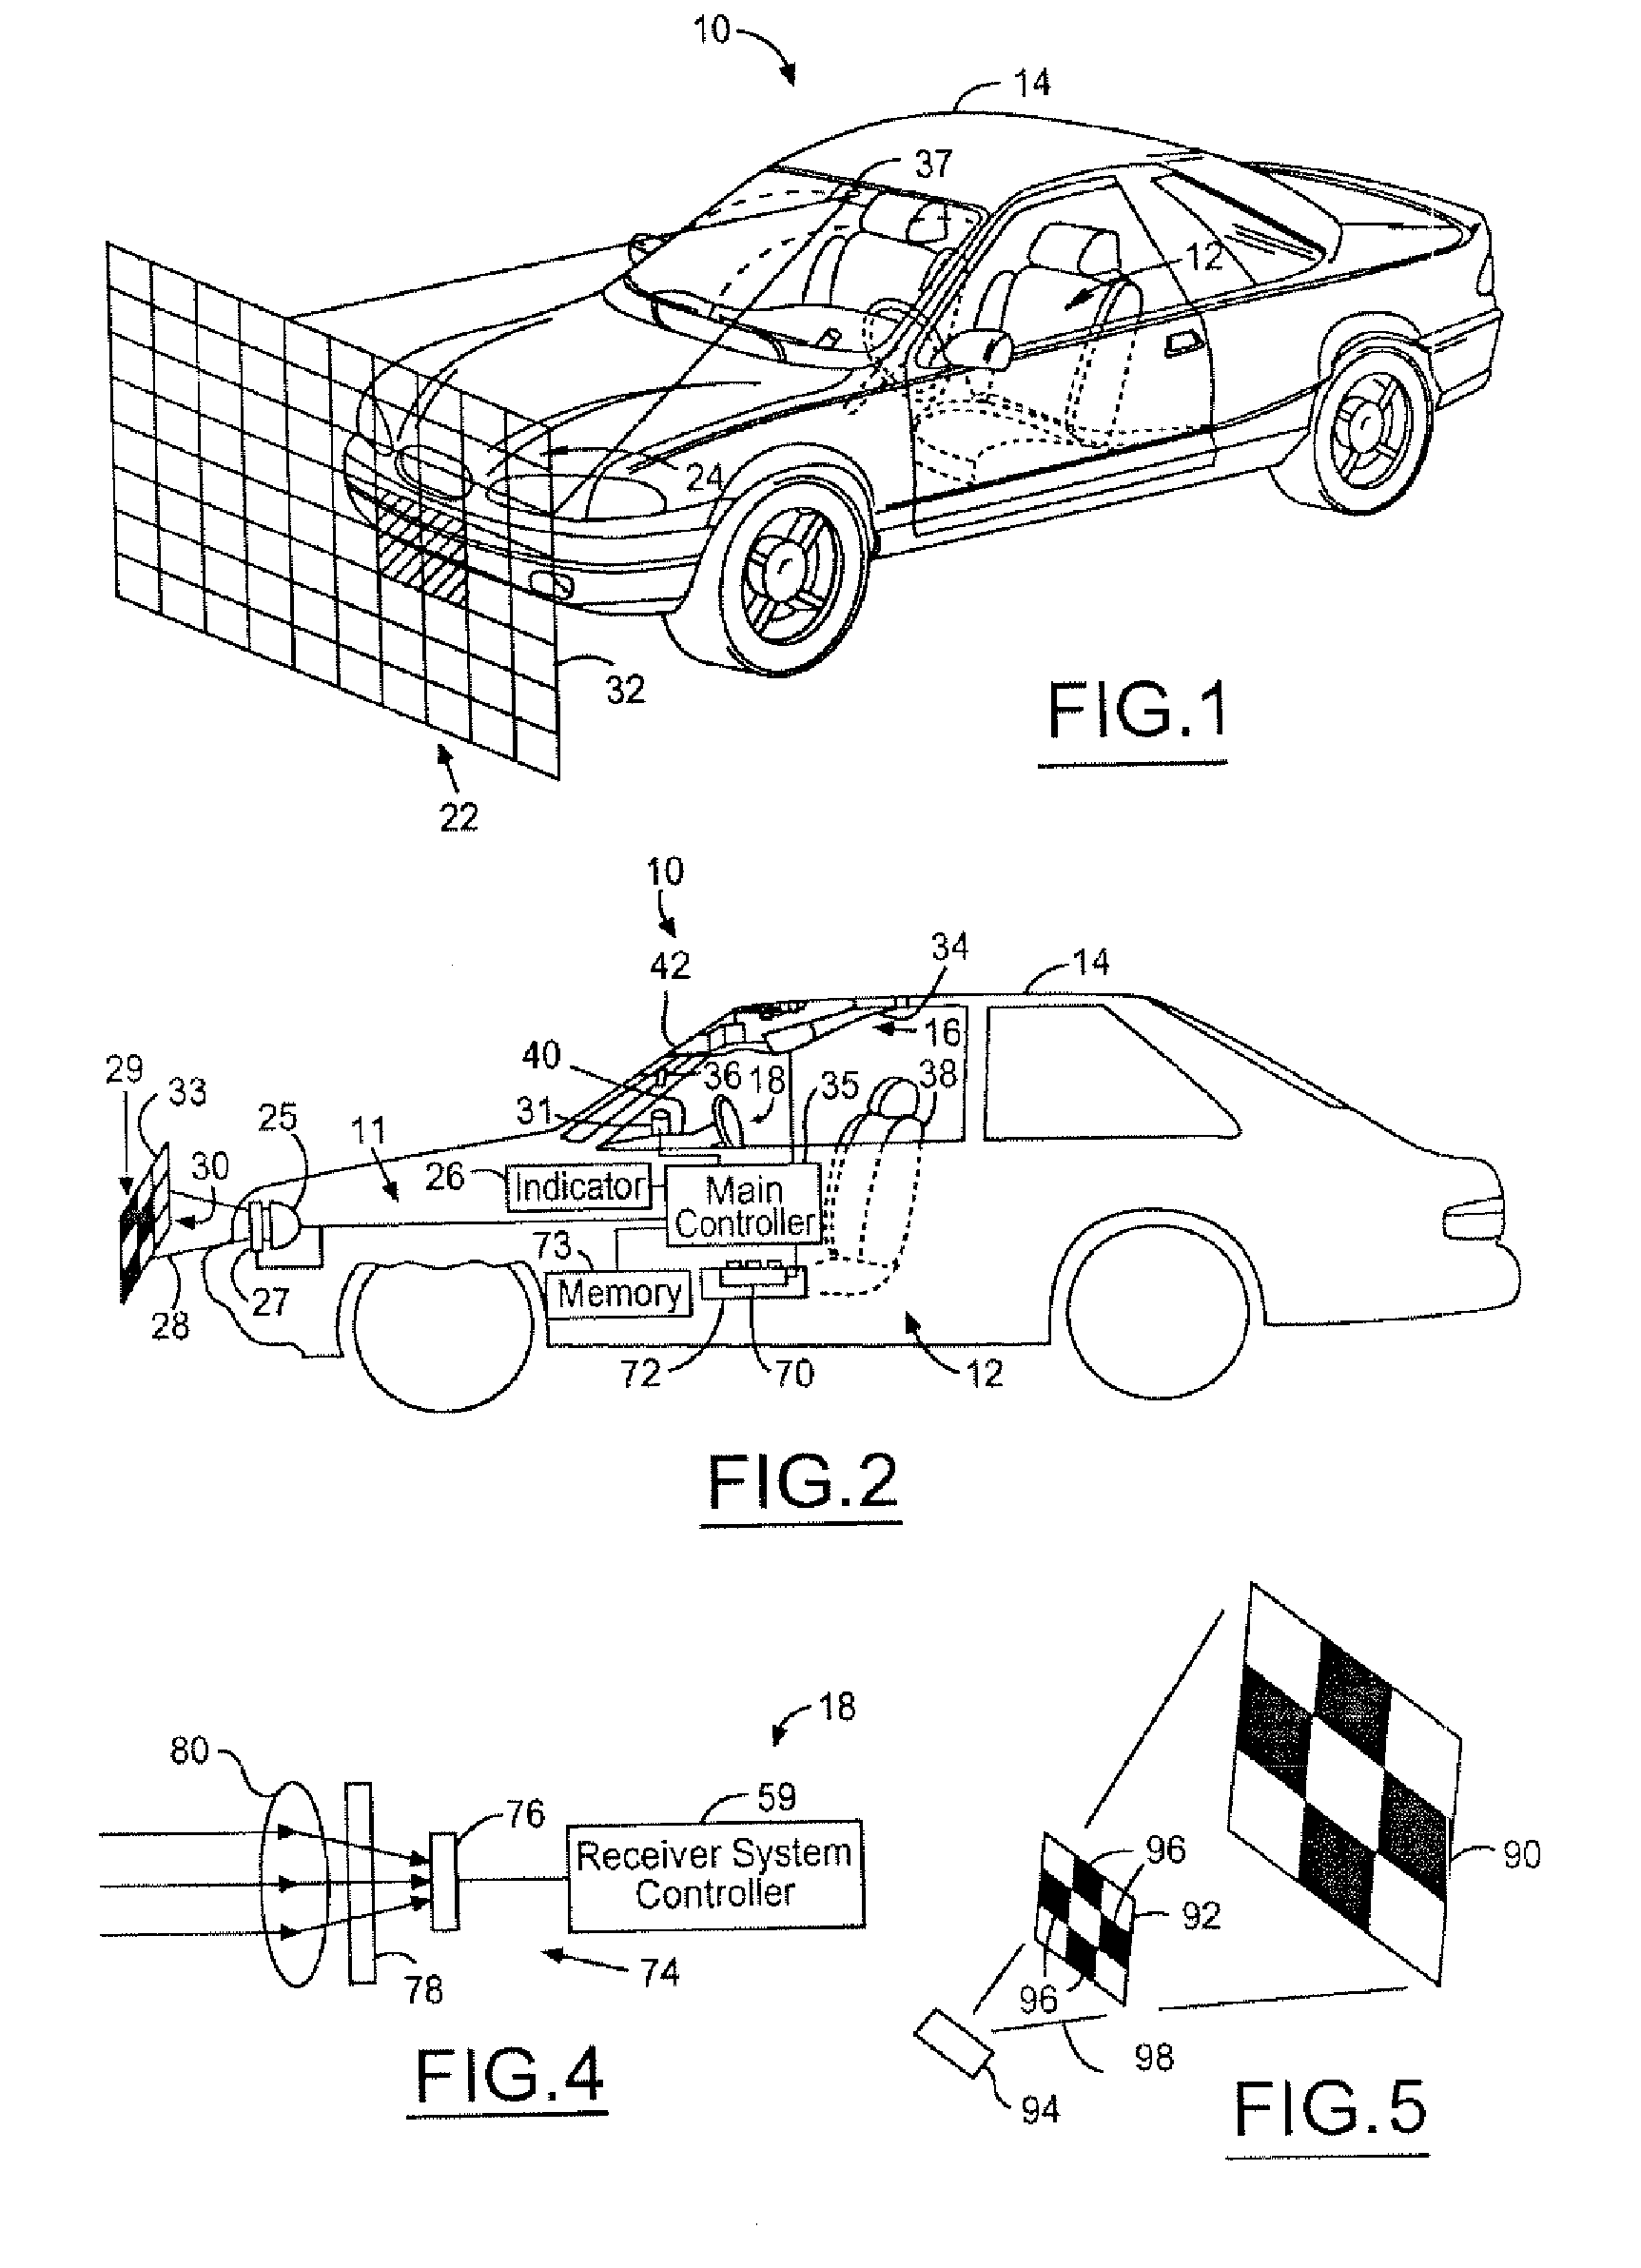 Anti-blinding system for a vehicle